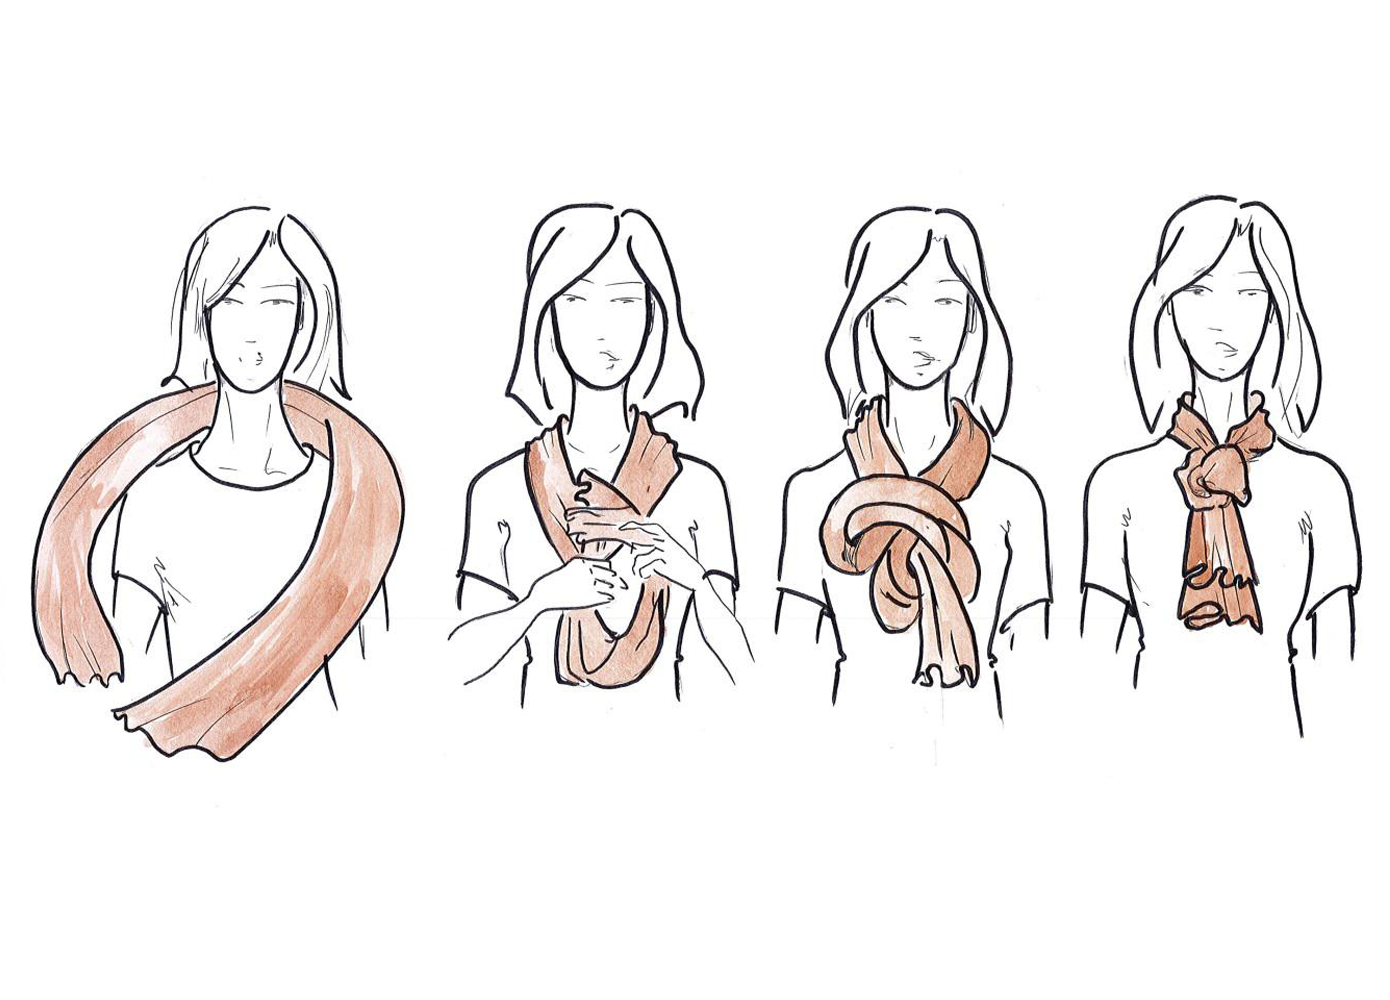 how to tie a scarf